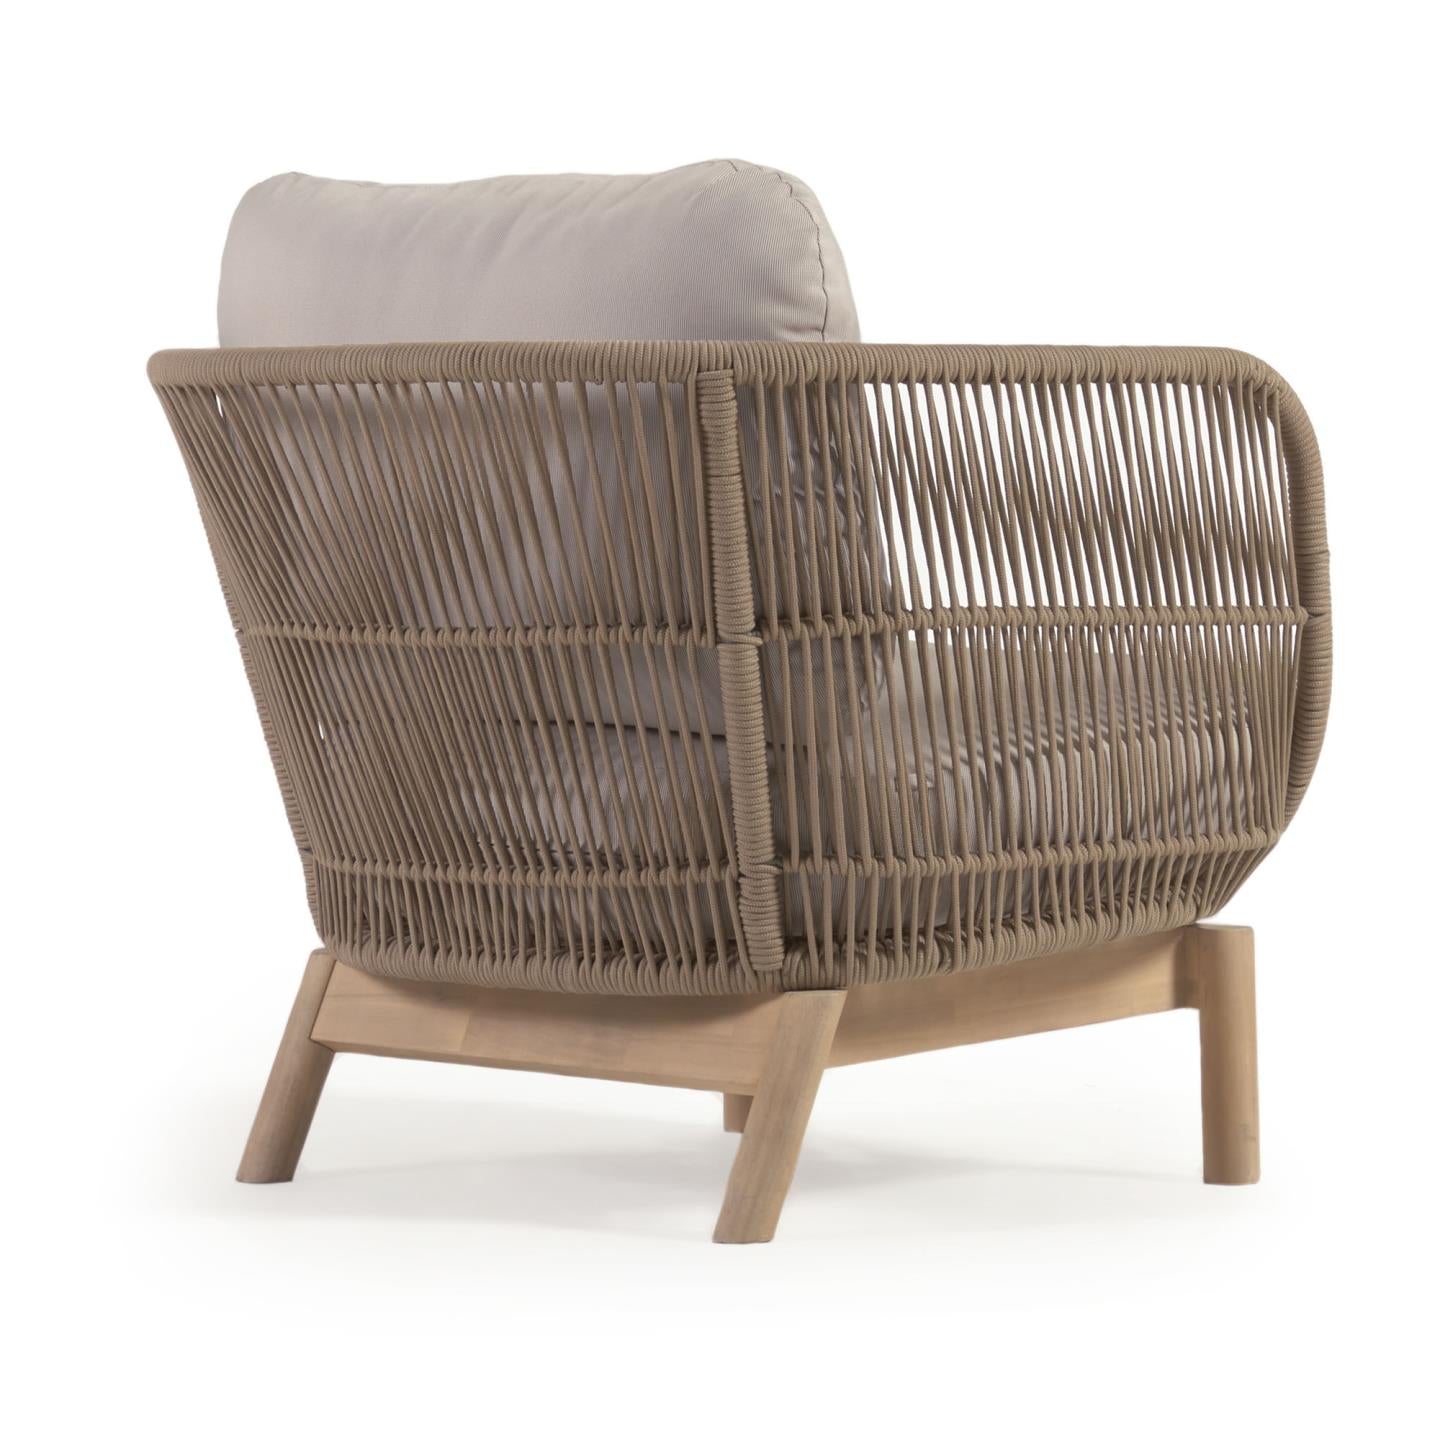 Catalina armchair made with beige rope and FSC solid acacia wood